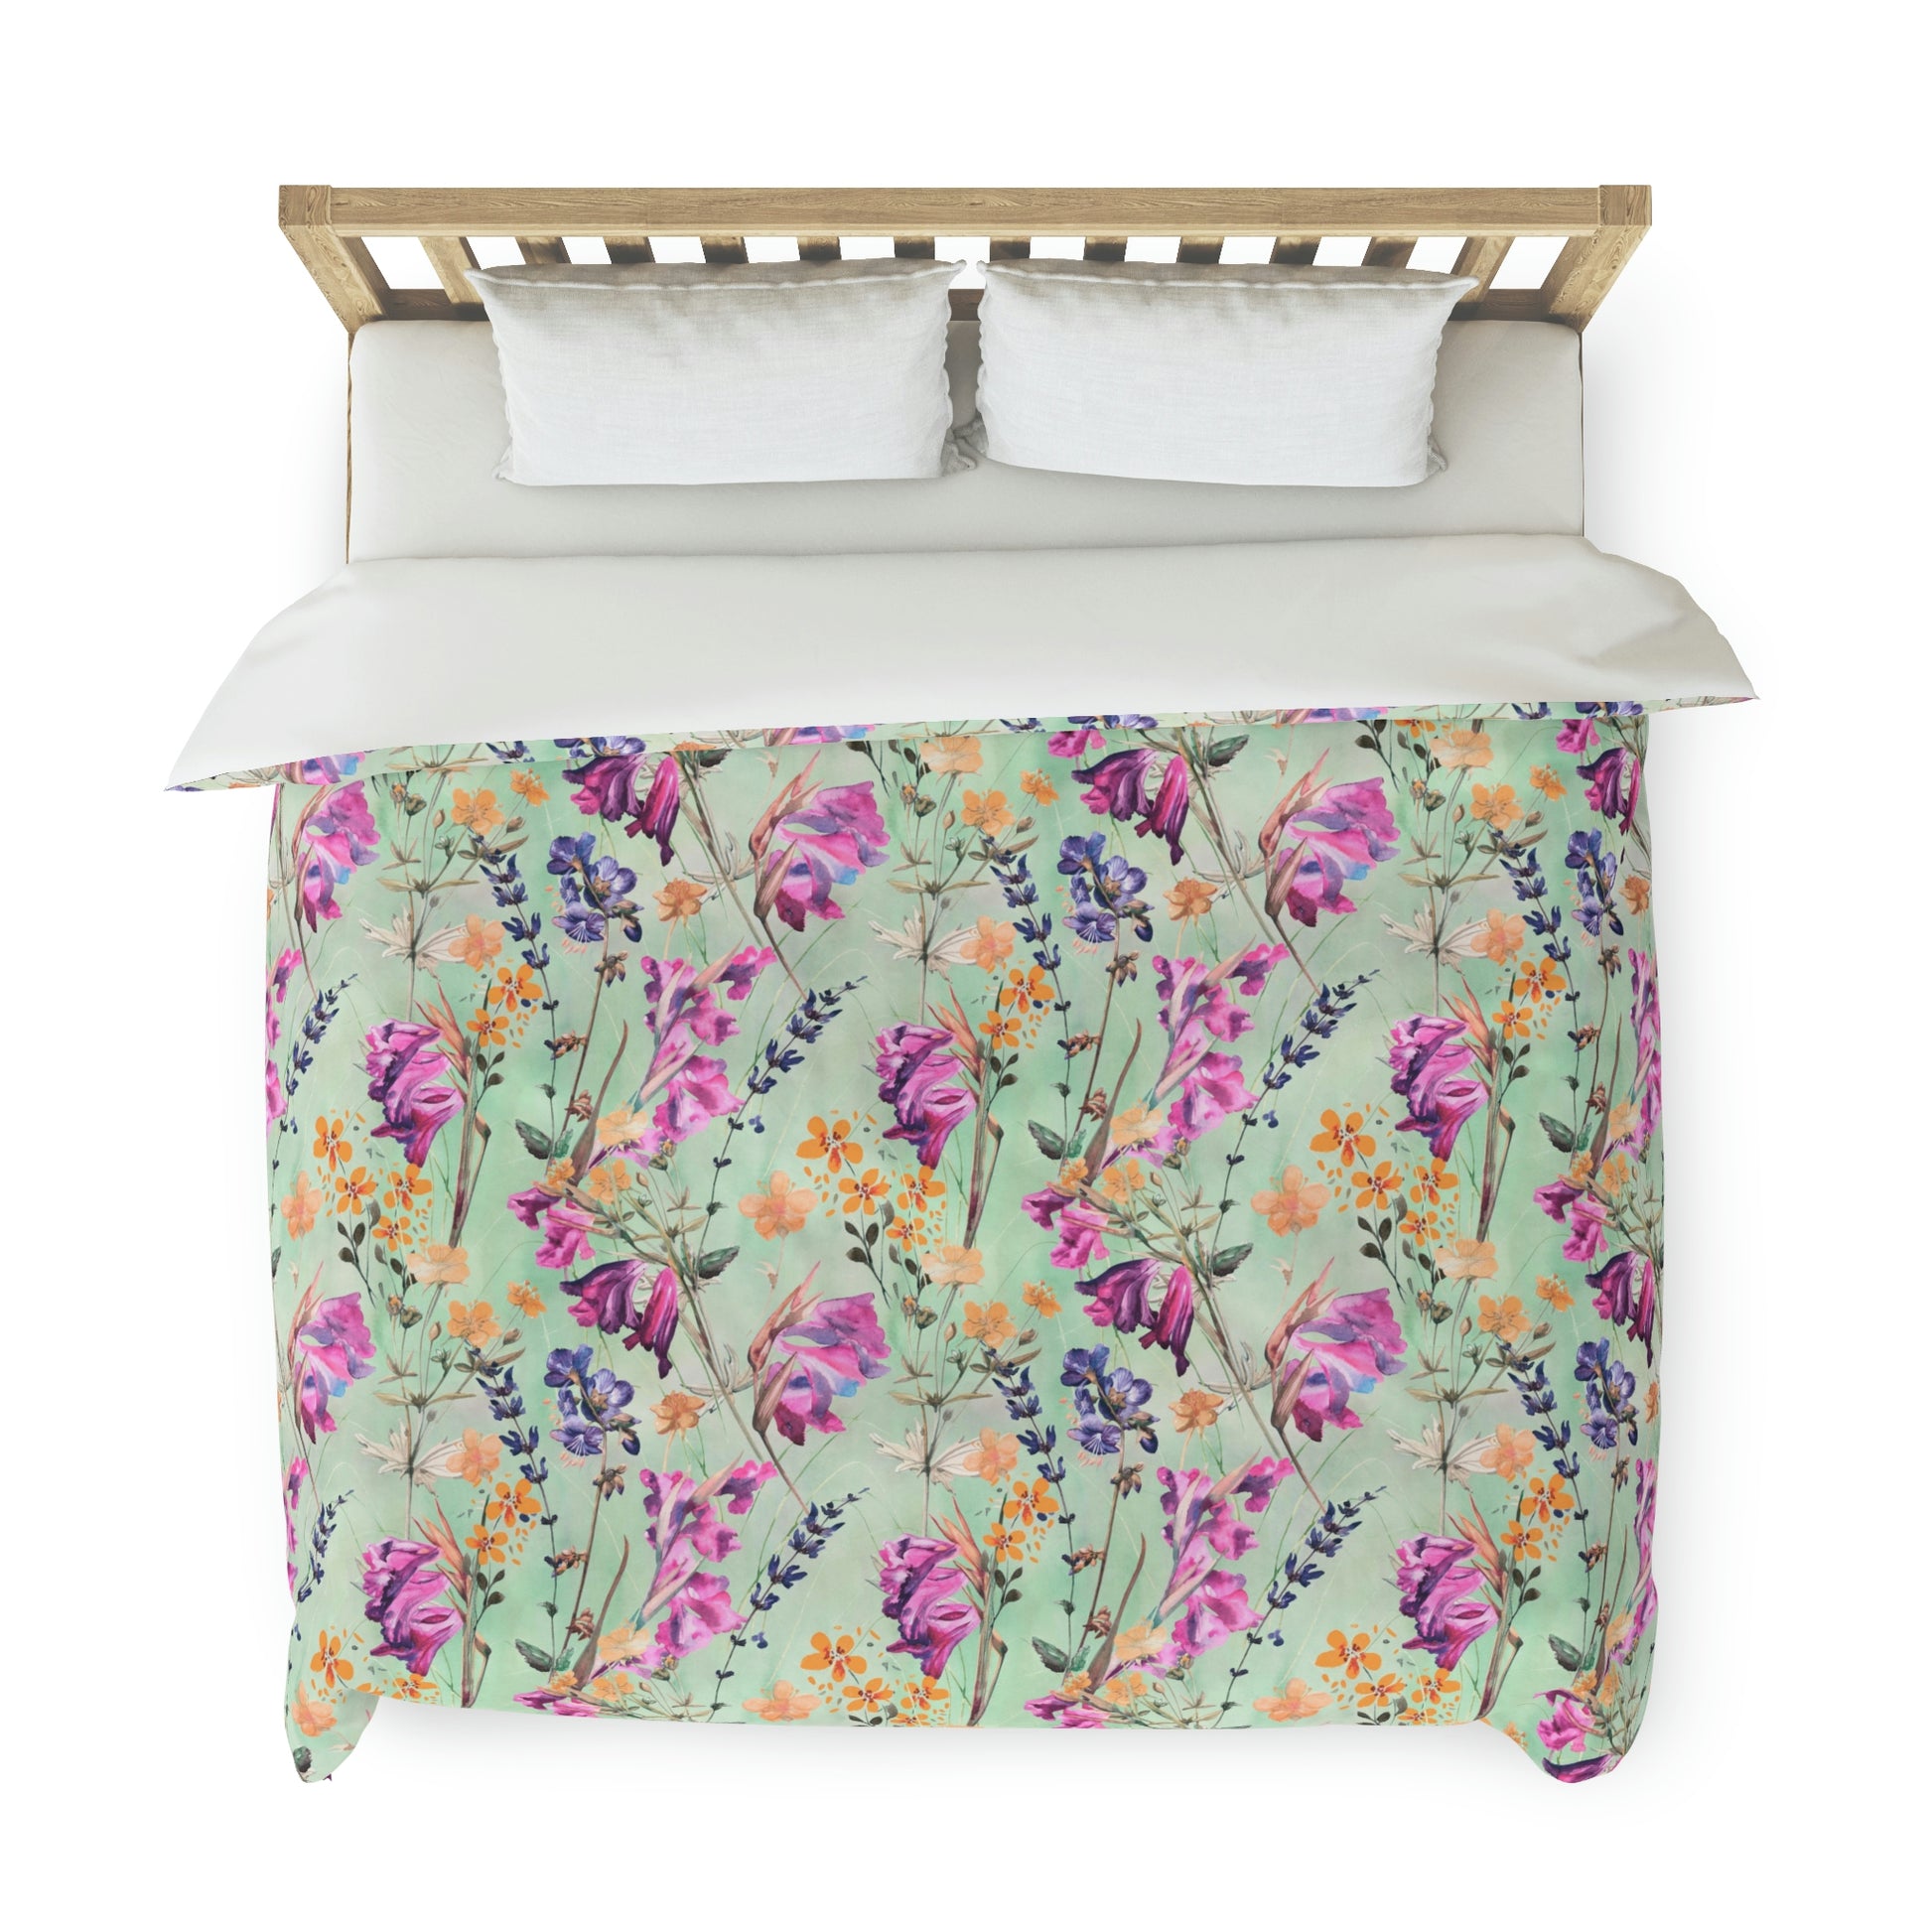 Mint Green & Purple Floral Pattern Duvet Cover lying on a bed, microfiber duvet cover bedroom accent